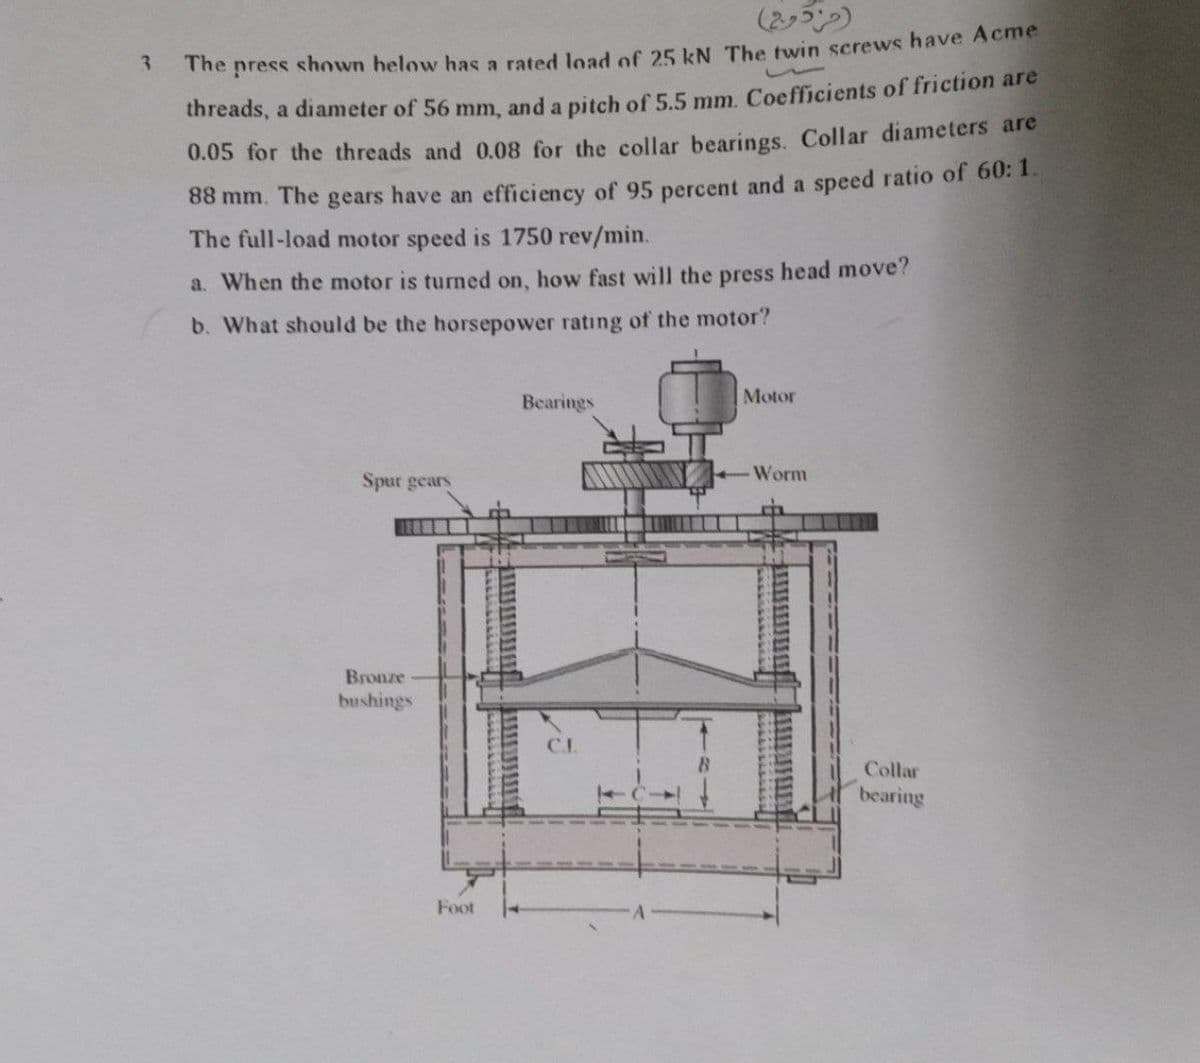 3
The press
shown below has a rated load of 25 kN The twin screws have Acme
threads, a diameter of 56 mm, and a pitch of 5.5 mm. Coefficients of friction are
0.05 for the threads and 0.08 for the collar bearings. Collar diameters are
88 mm. The gears have an efficiency of 95 percent and a speed ratio of 60: 1.
The full-load motor speed is 1750 rev/min.
a. When the motor is turned on, how fast will the press head move?
b. What should be the horsepower rating of the motor?
Bearings
Motor
Spur gears
Bronze
bushings
(مزدوج)
Foot
Worm
Collar
bearing